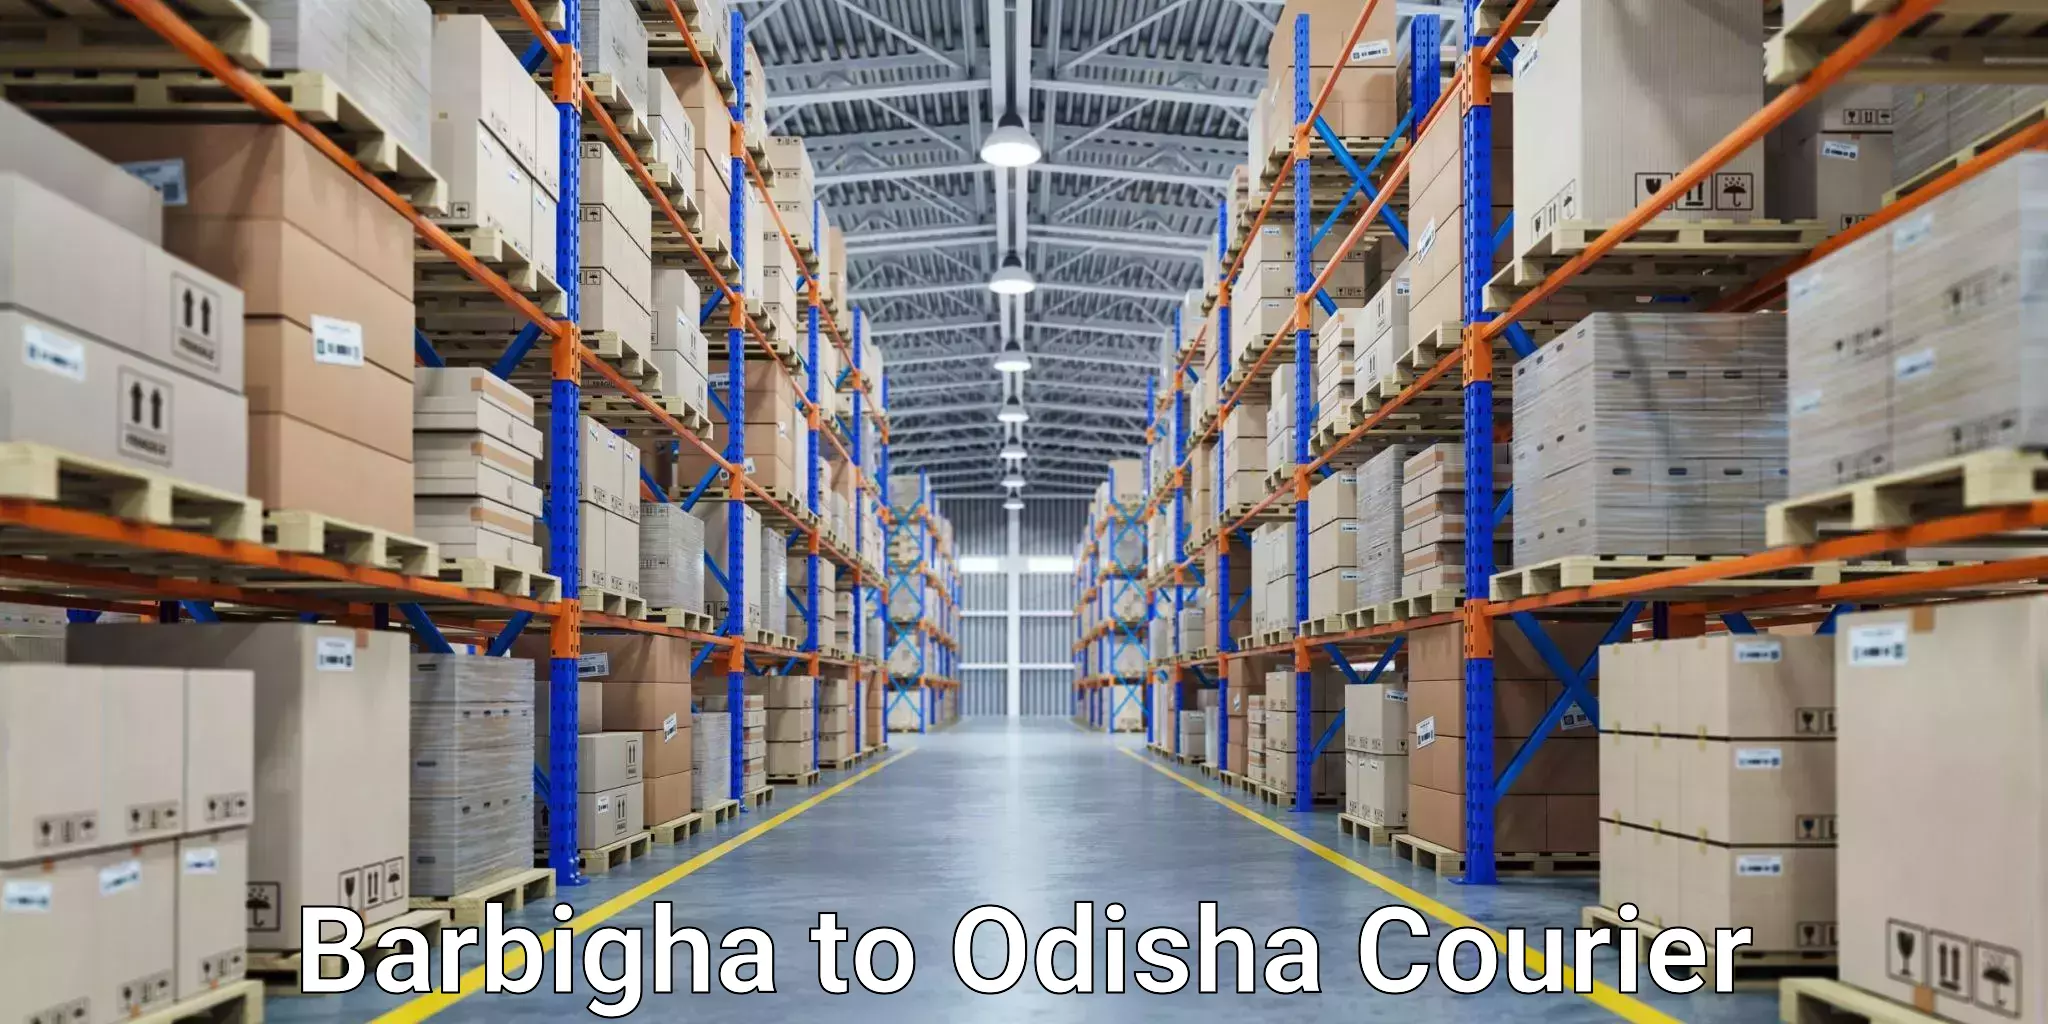 Courier dispatch services Barbigha to Ukhunda